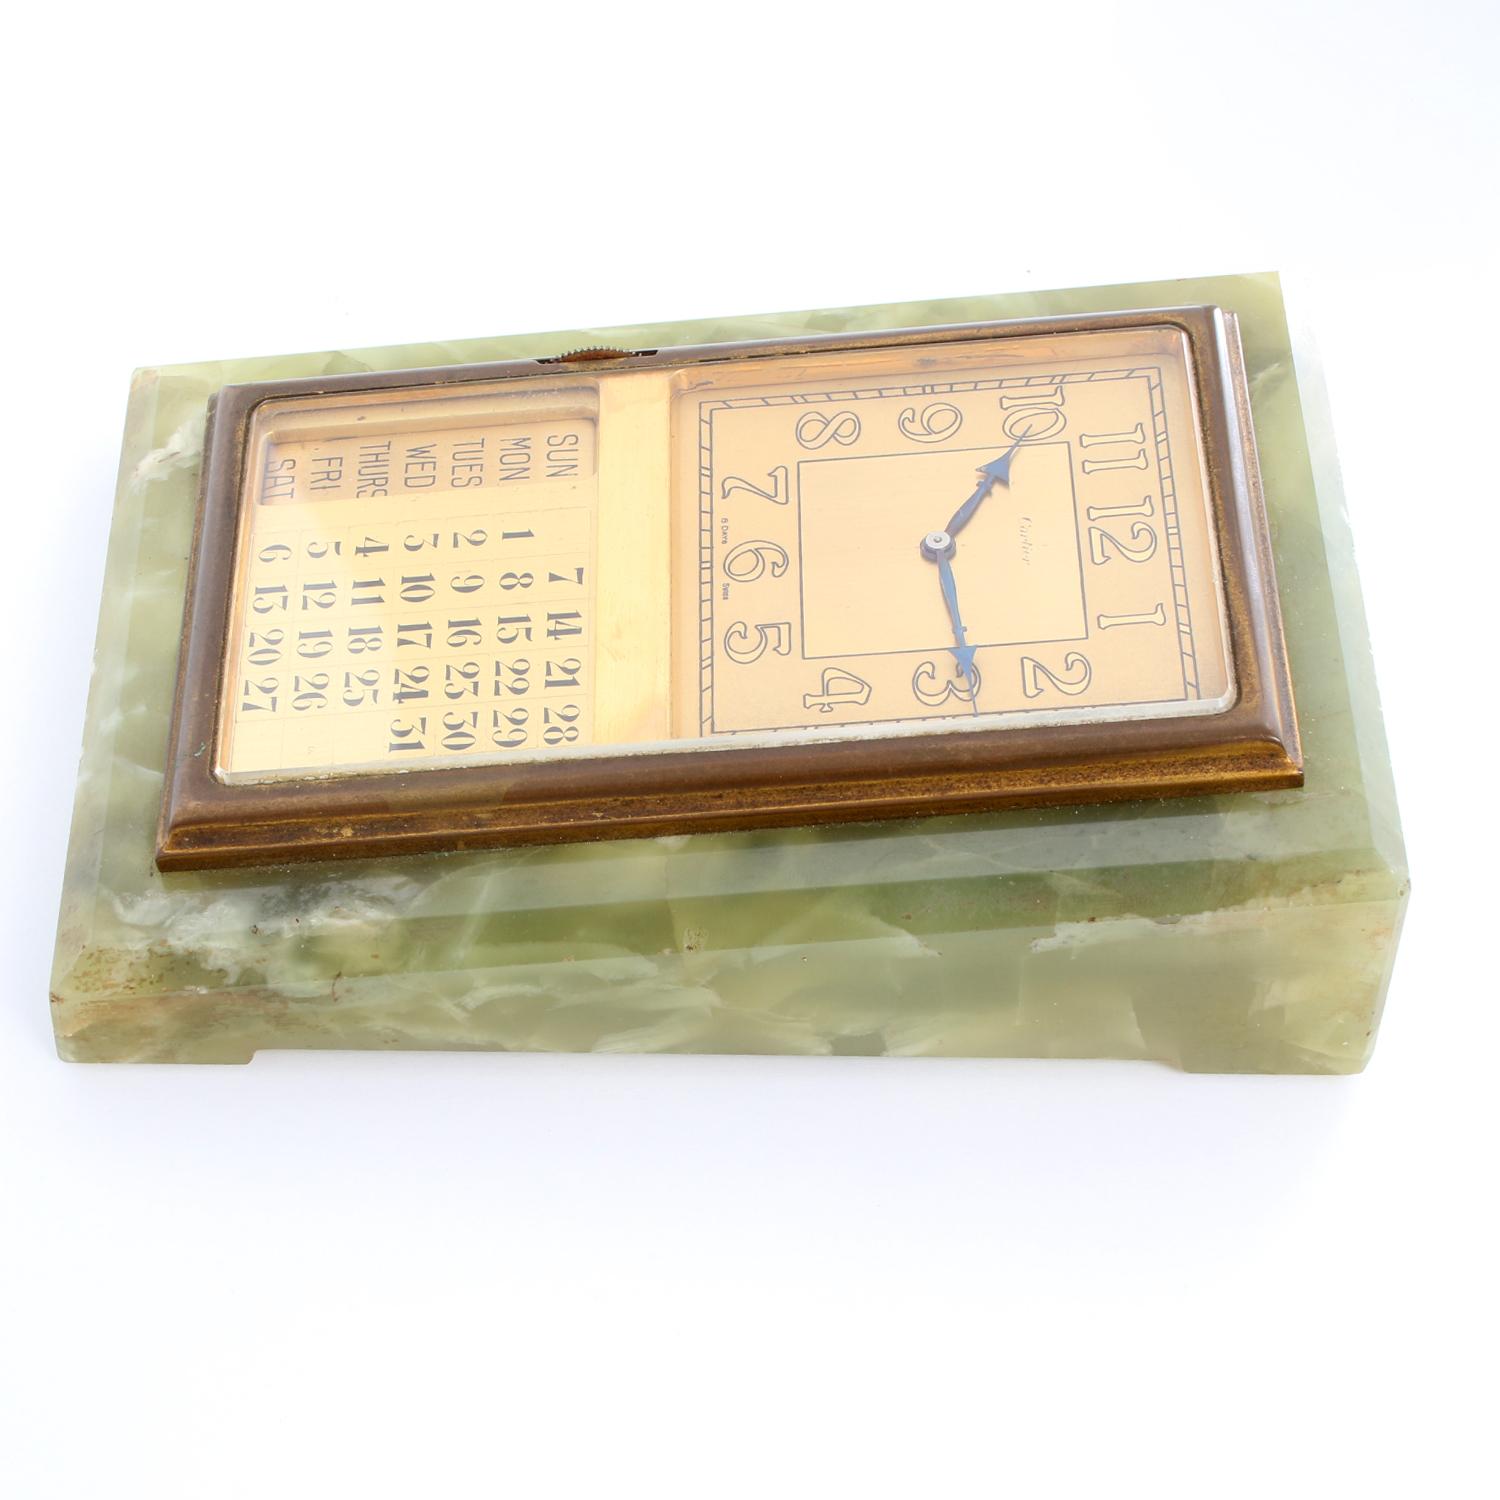 Unique Cartier Brass Mounted Calendar Desk Clock - Manual winding. Brass mounted. Champagne dial with Arabic numerals. Beautiful calendar desk clock. The dial is signed Cartier. The days of the week change as the calendar changes. Keeping perfect